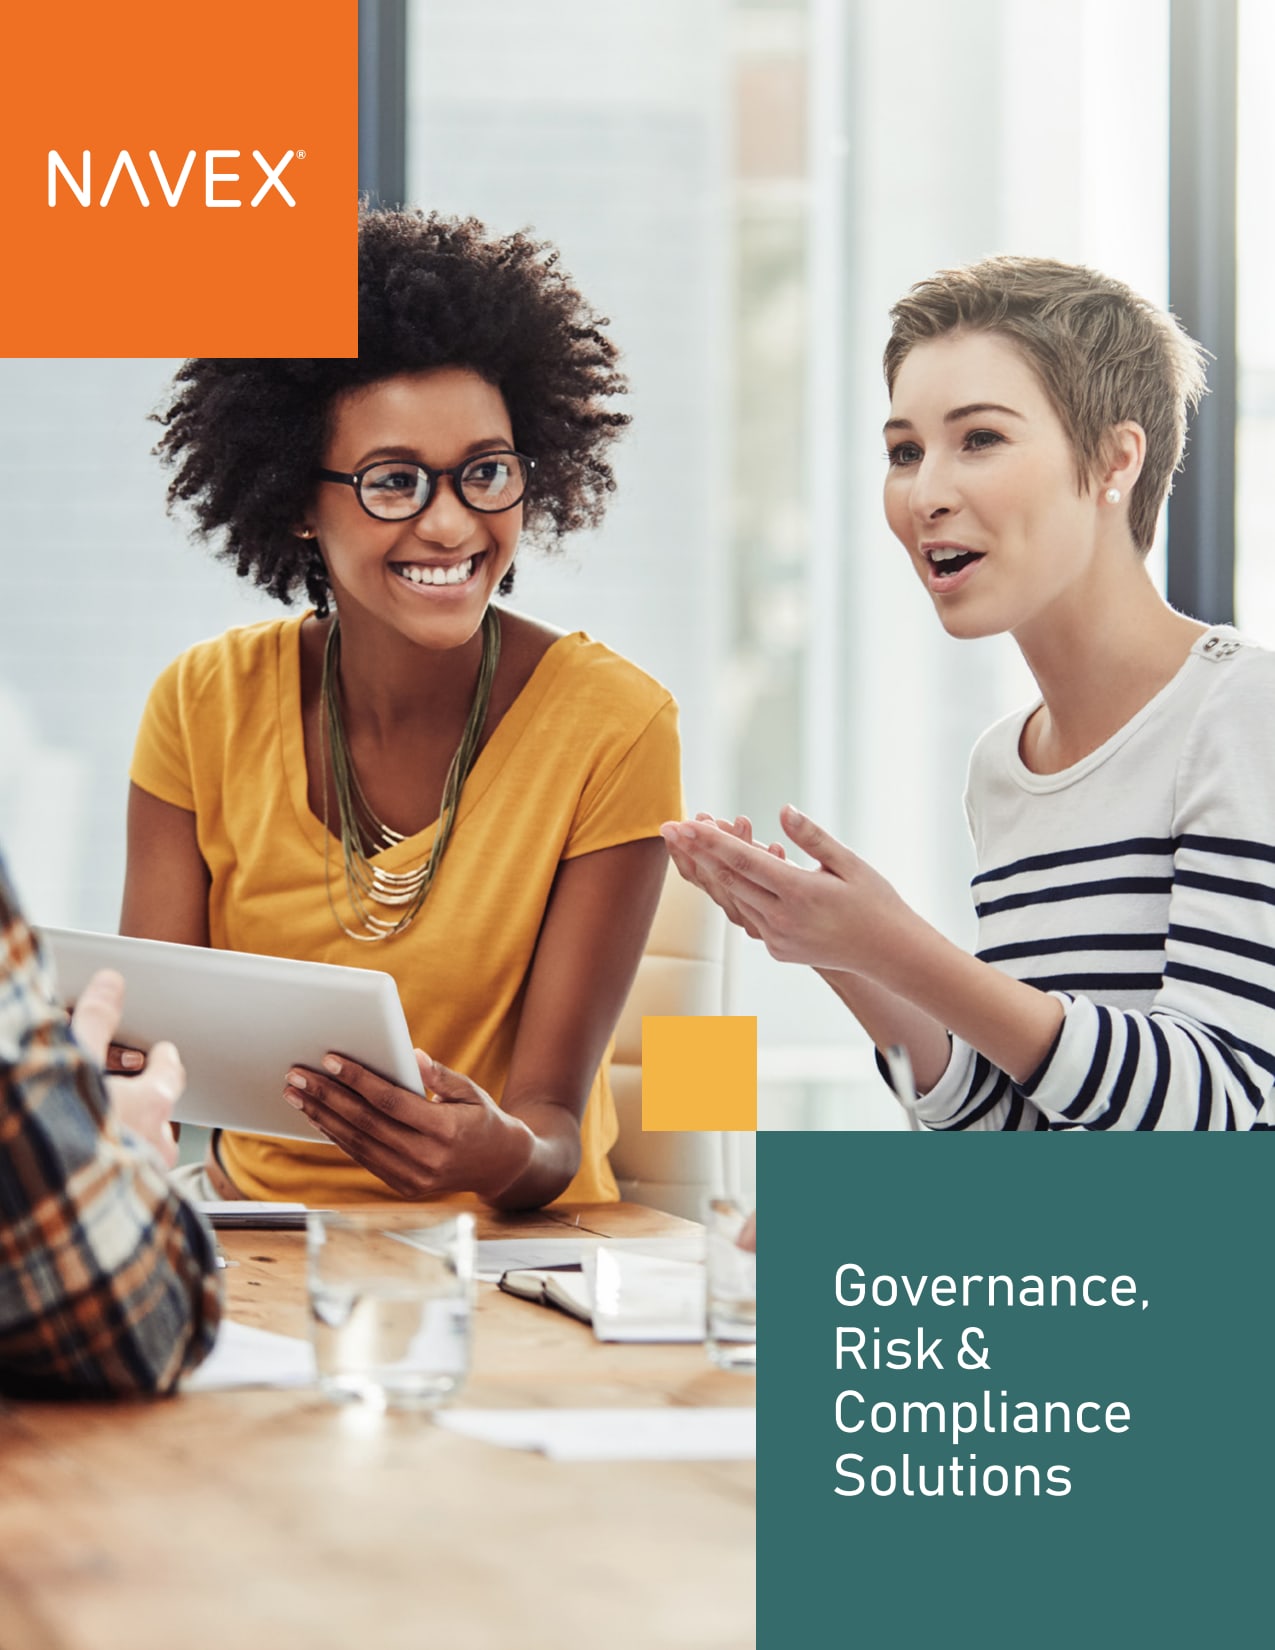 NAVEX Solution Overview